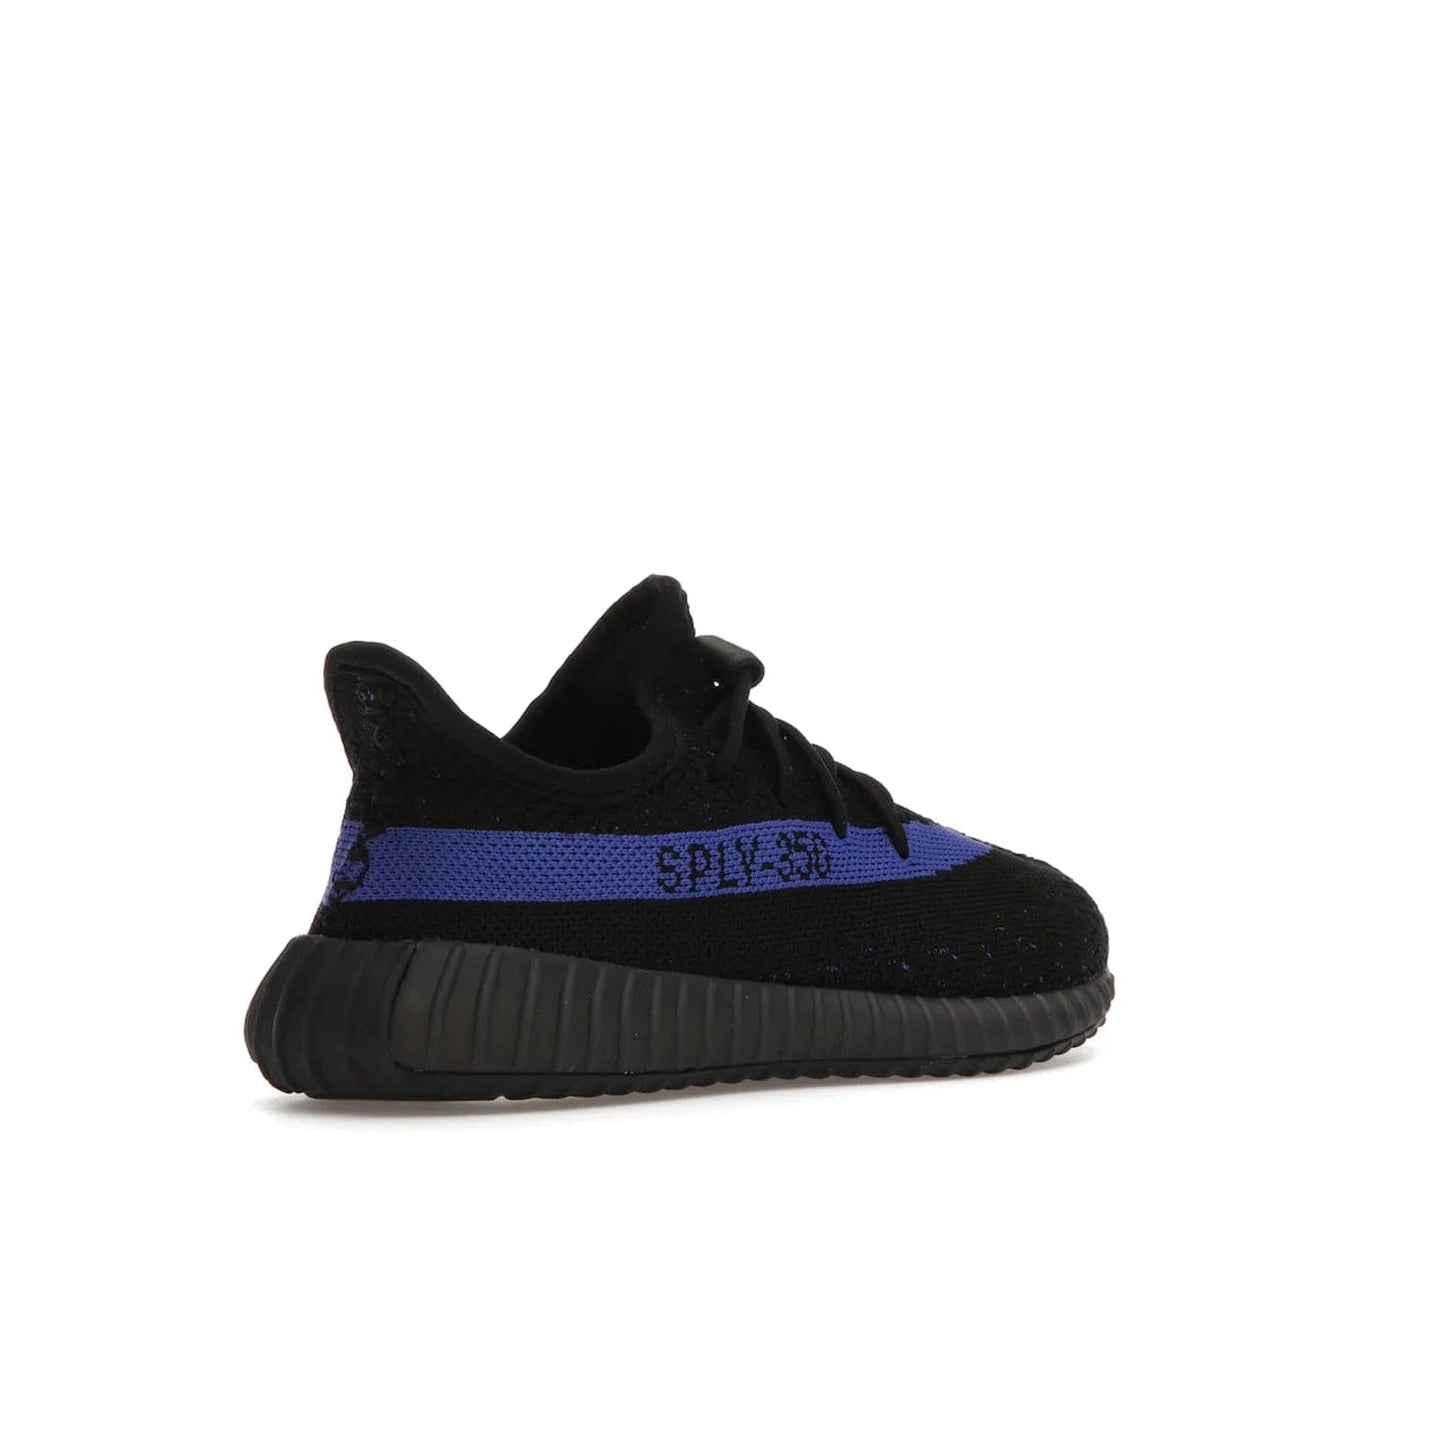 adidas Yeezy Boost 350 V2 Dazzling Blue (Kids) - Image 33 - Only at www.BallersClubKickz.com - Shop the adidas Yeezy Boost 350 V2 Dazzling Blue (Kids). Features a black Primeknit upper with a royal blue 'SPLY-350' streak and a full-length Boost midsole. Durable rubber outsole provides plenty of traction. Available for $160.